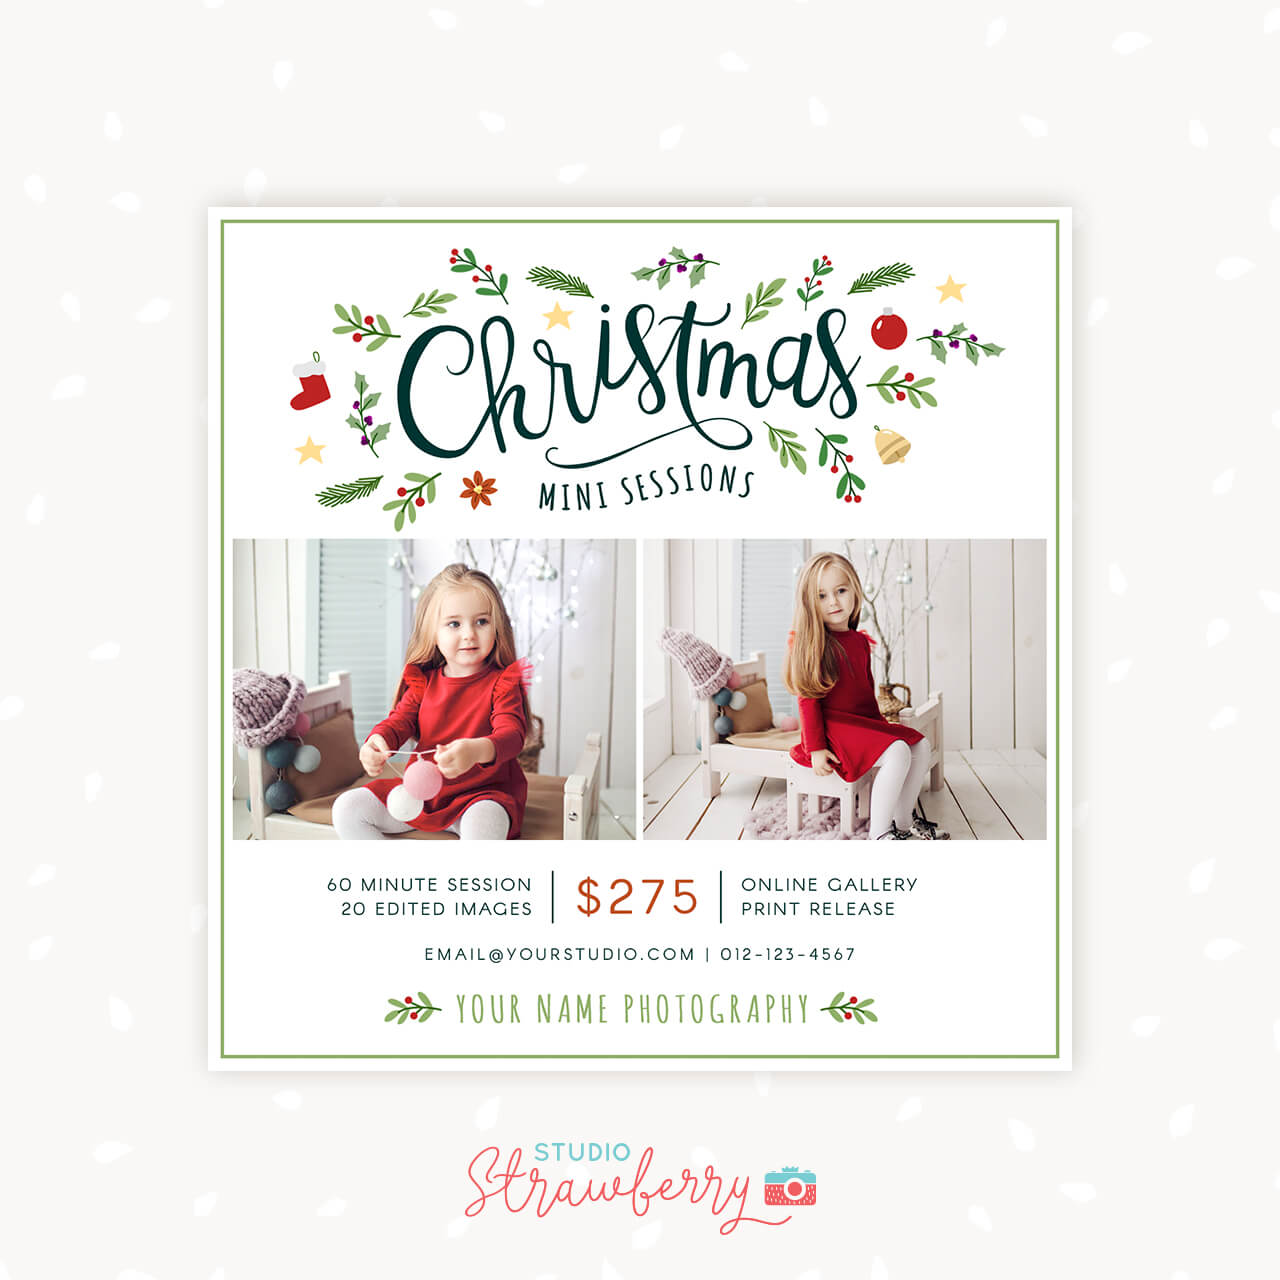 Christmas Mini Session Template “Colorful leaves & ornaments